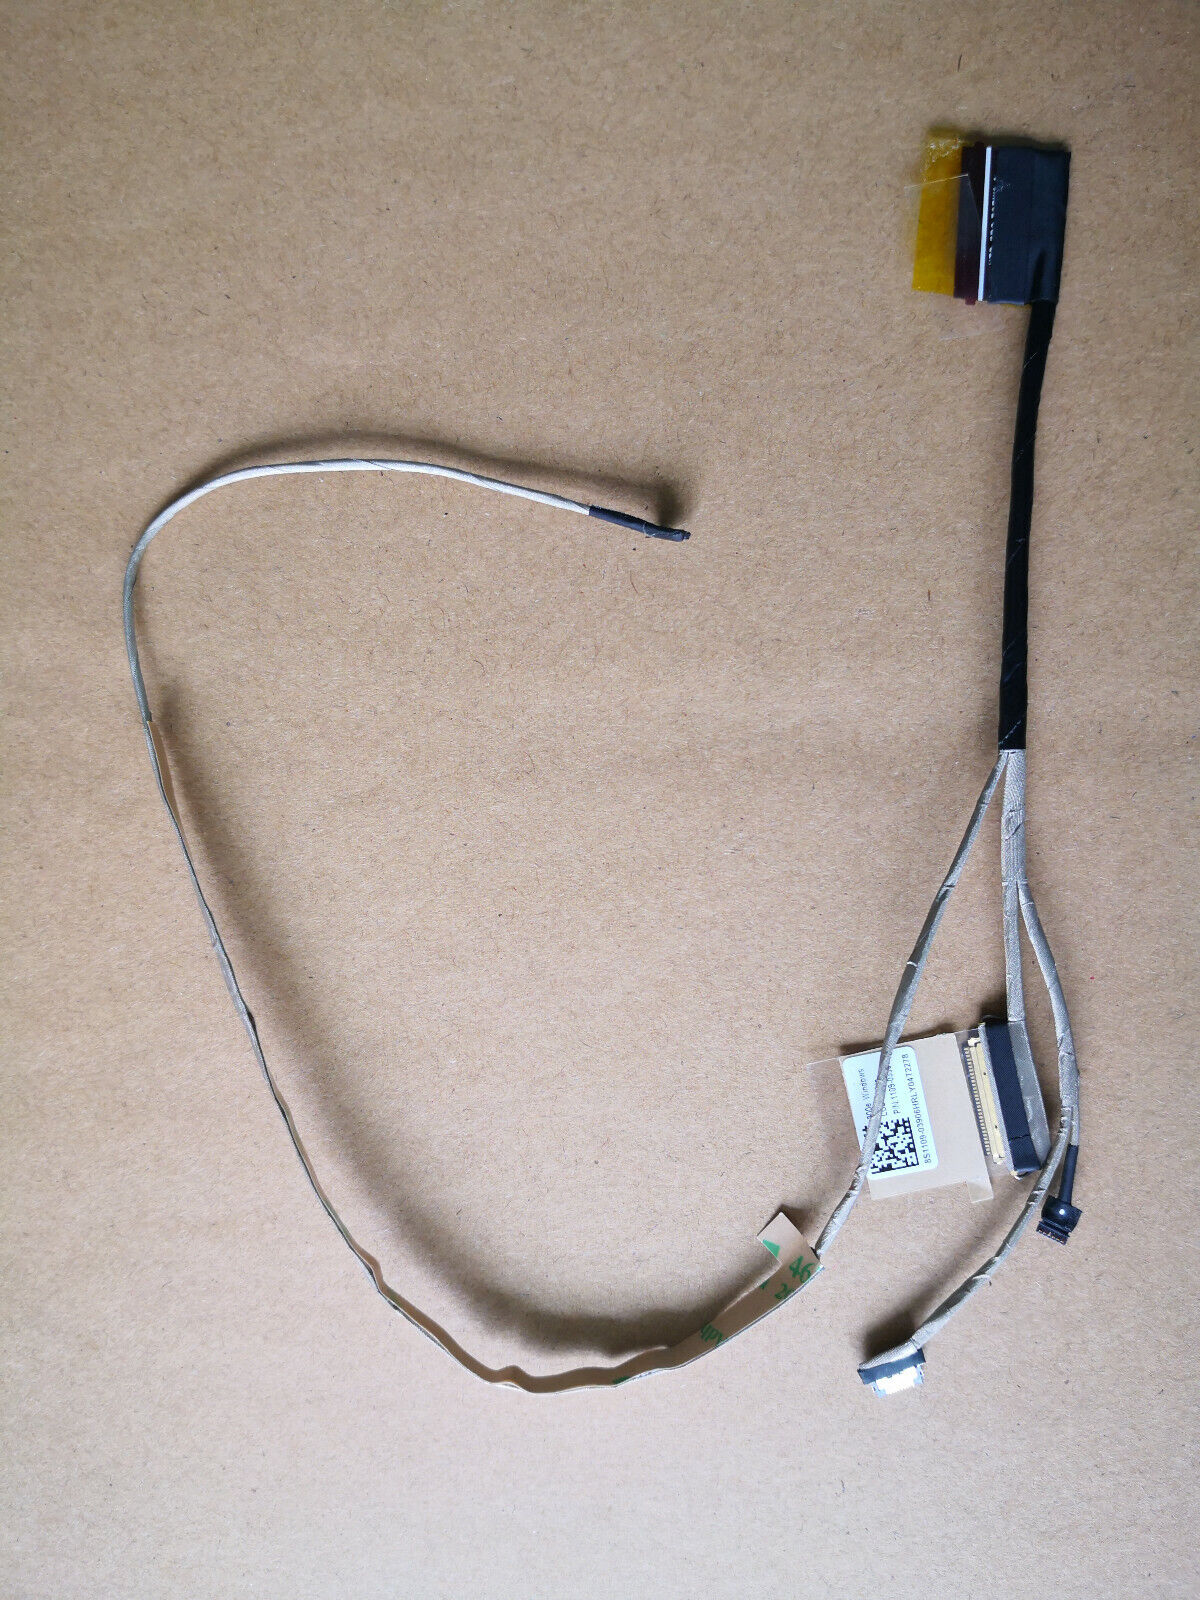 Lenovo New LCD LED LVDS EDP Display Video Screen Cable Windows WinBook 300e 81M9 Chromebook N23 2nd Gen G2 1109-03906